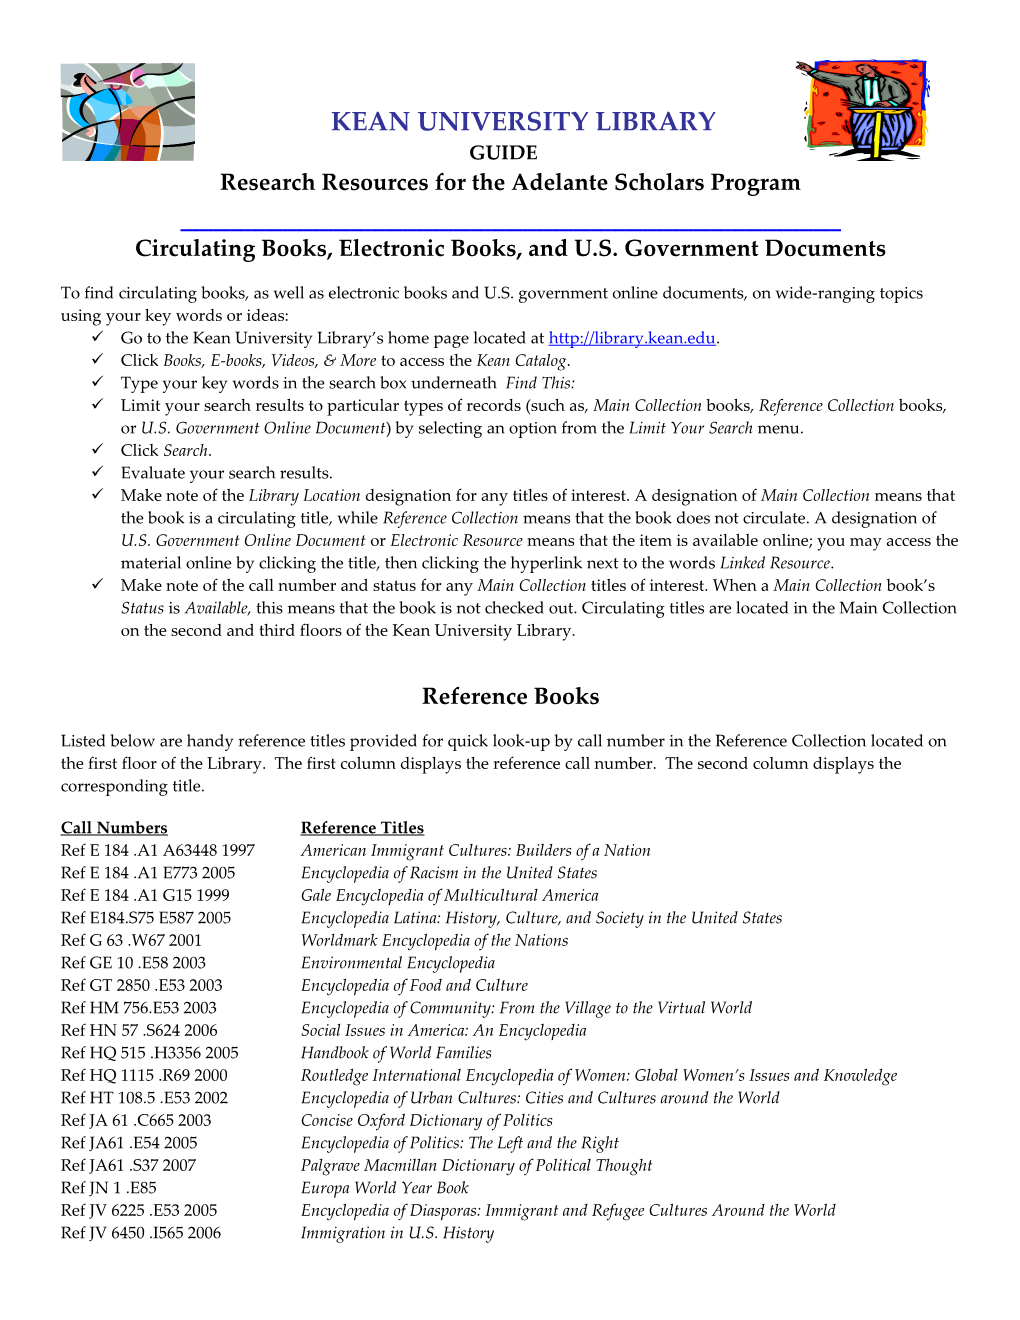 Research Resources for the Adelante Scholars Program